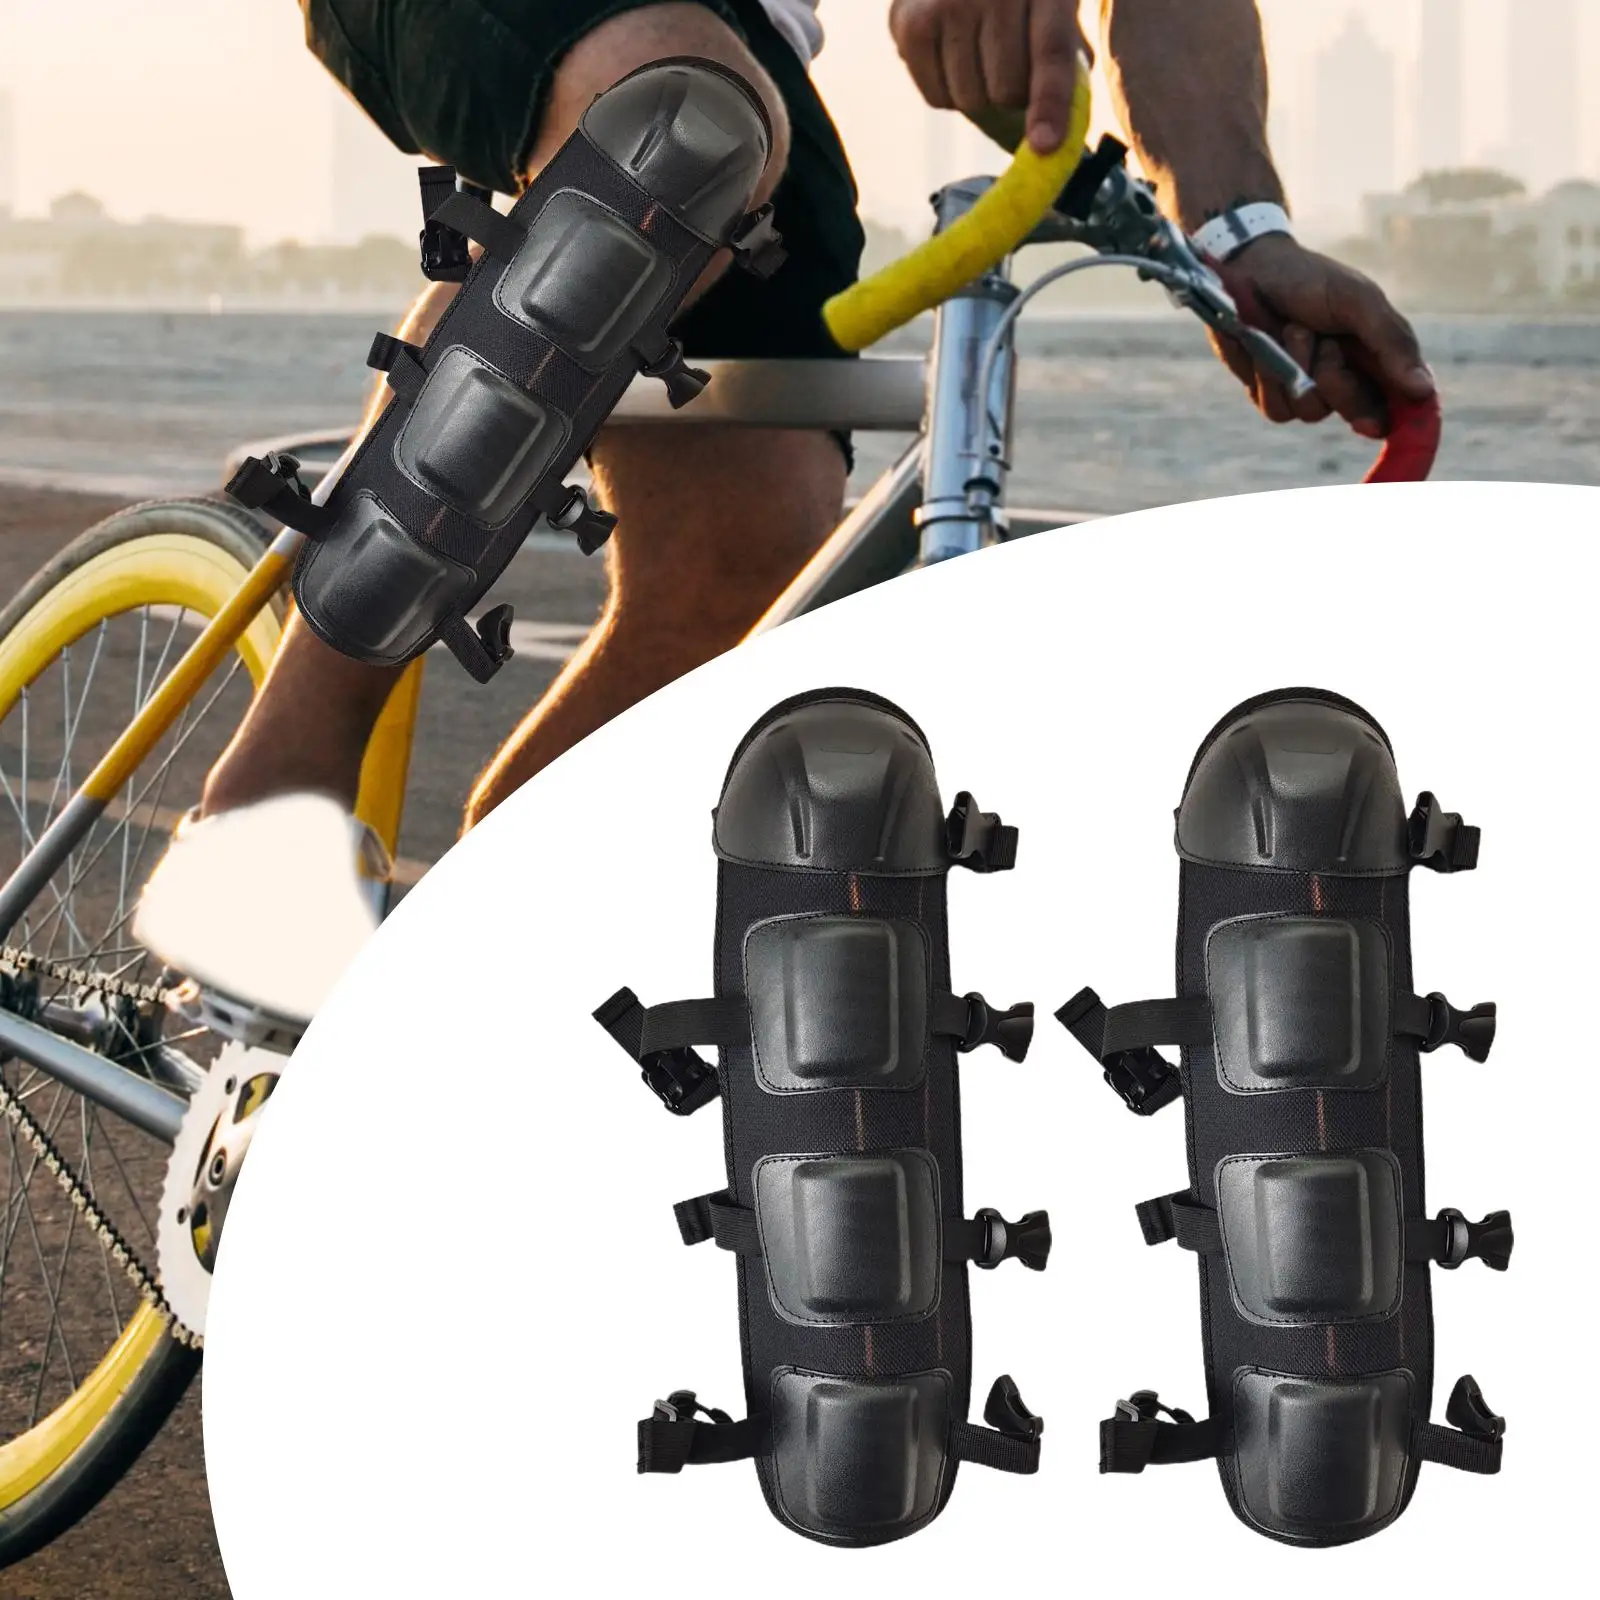 Work Knee Pads Kneelet Protective Gear for Construction Mountain Bikes Home